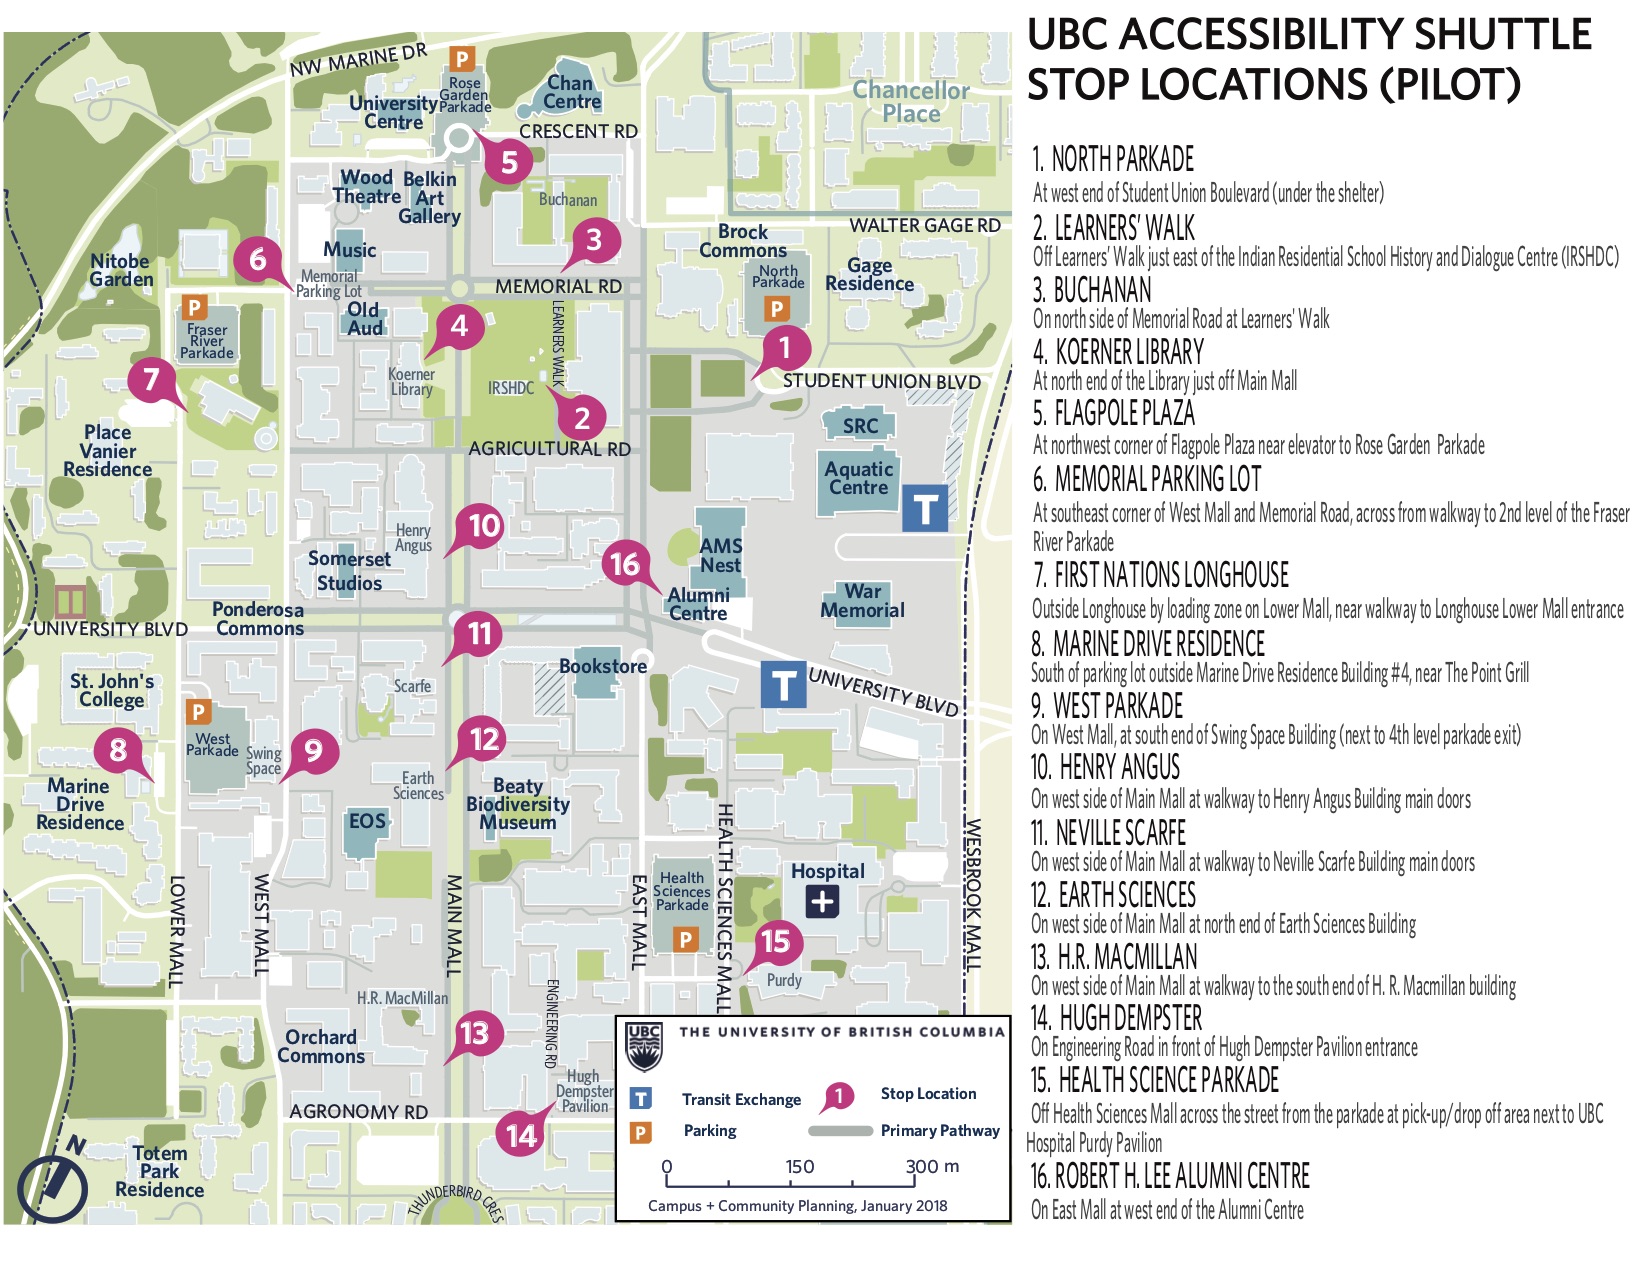 Stop Locations accessibility shuttle